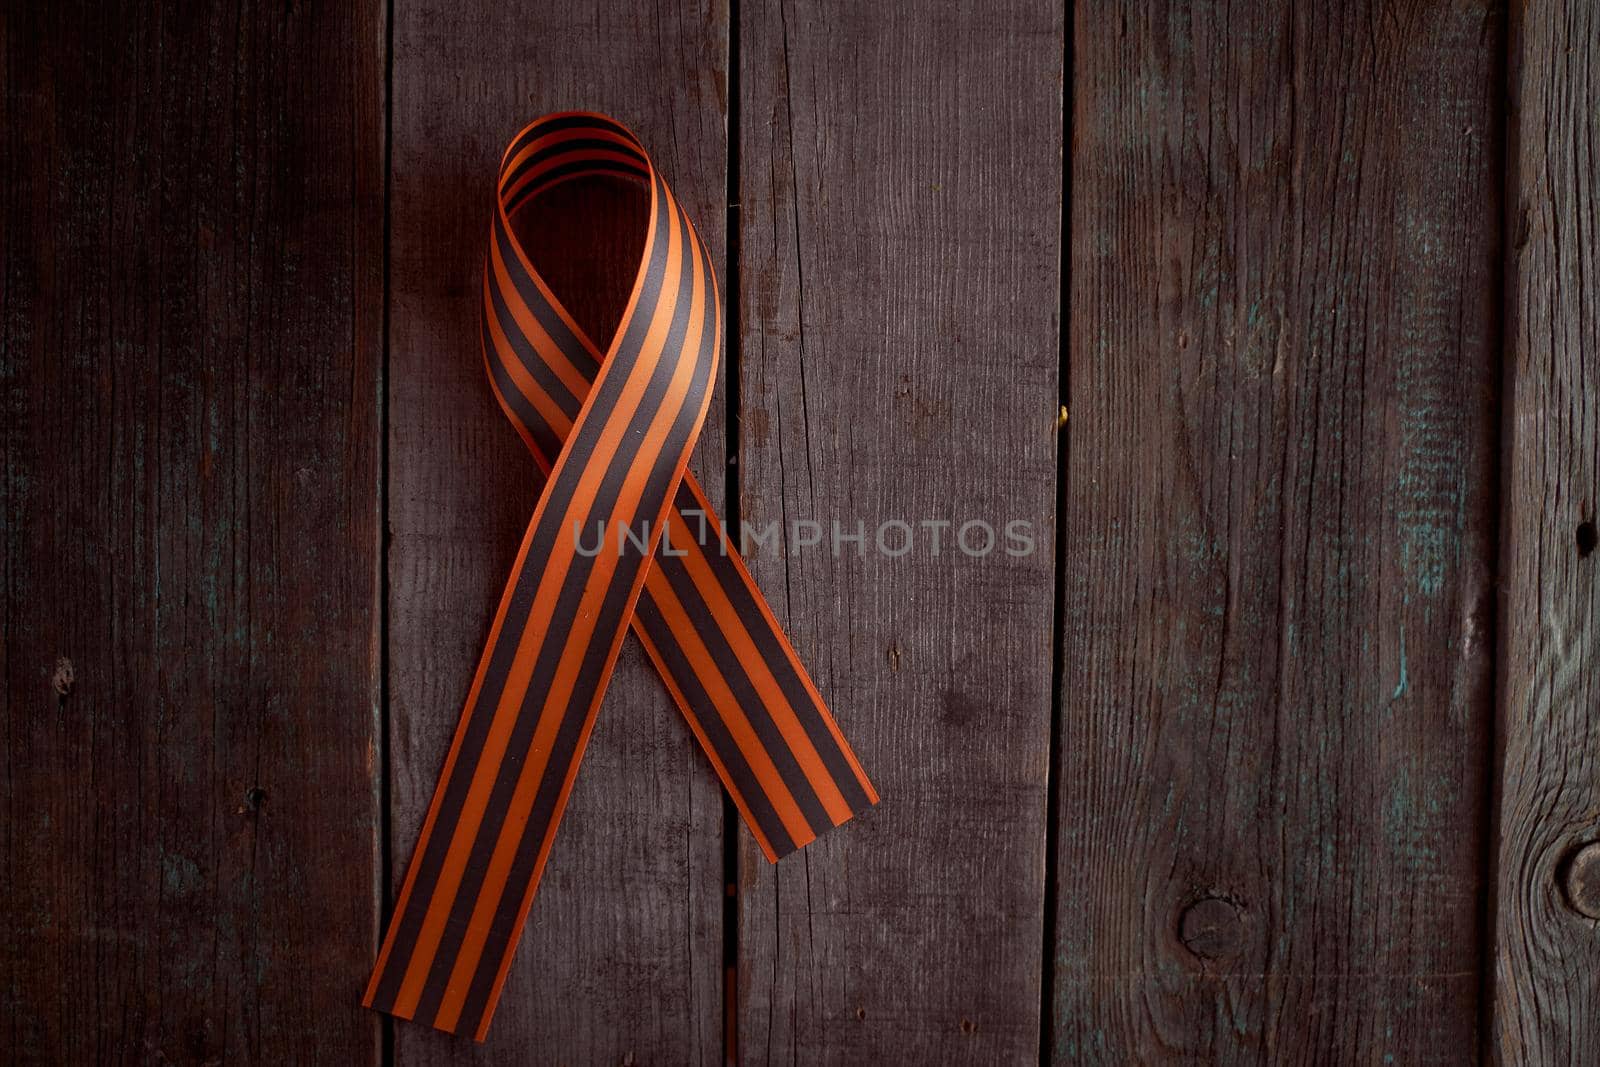 Folded St. George ribbon on a wooden background by Xelar